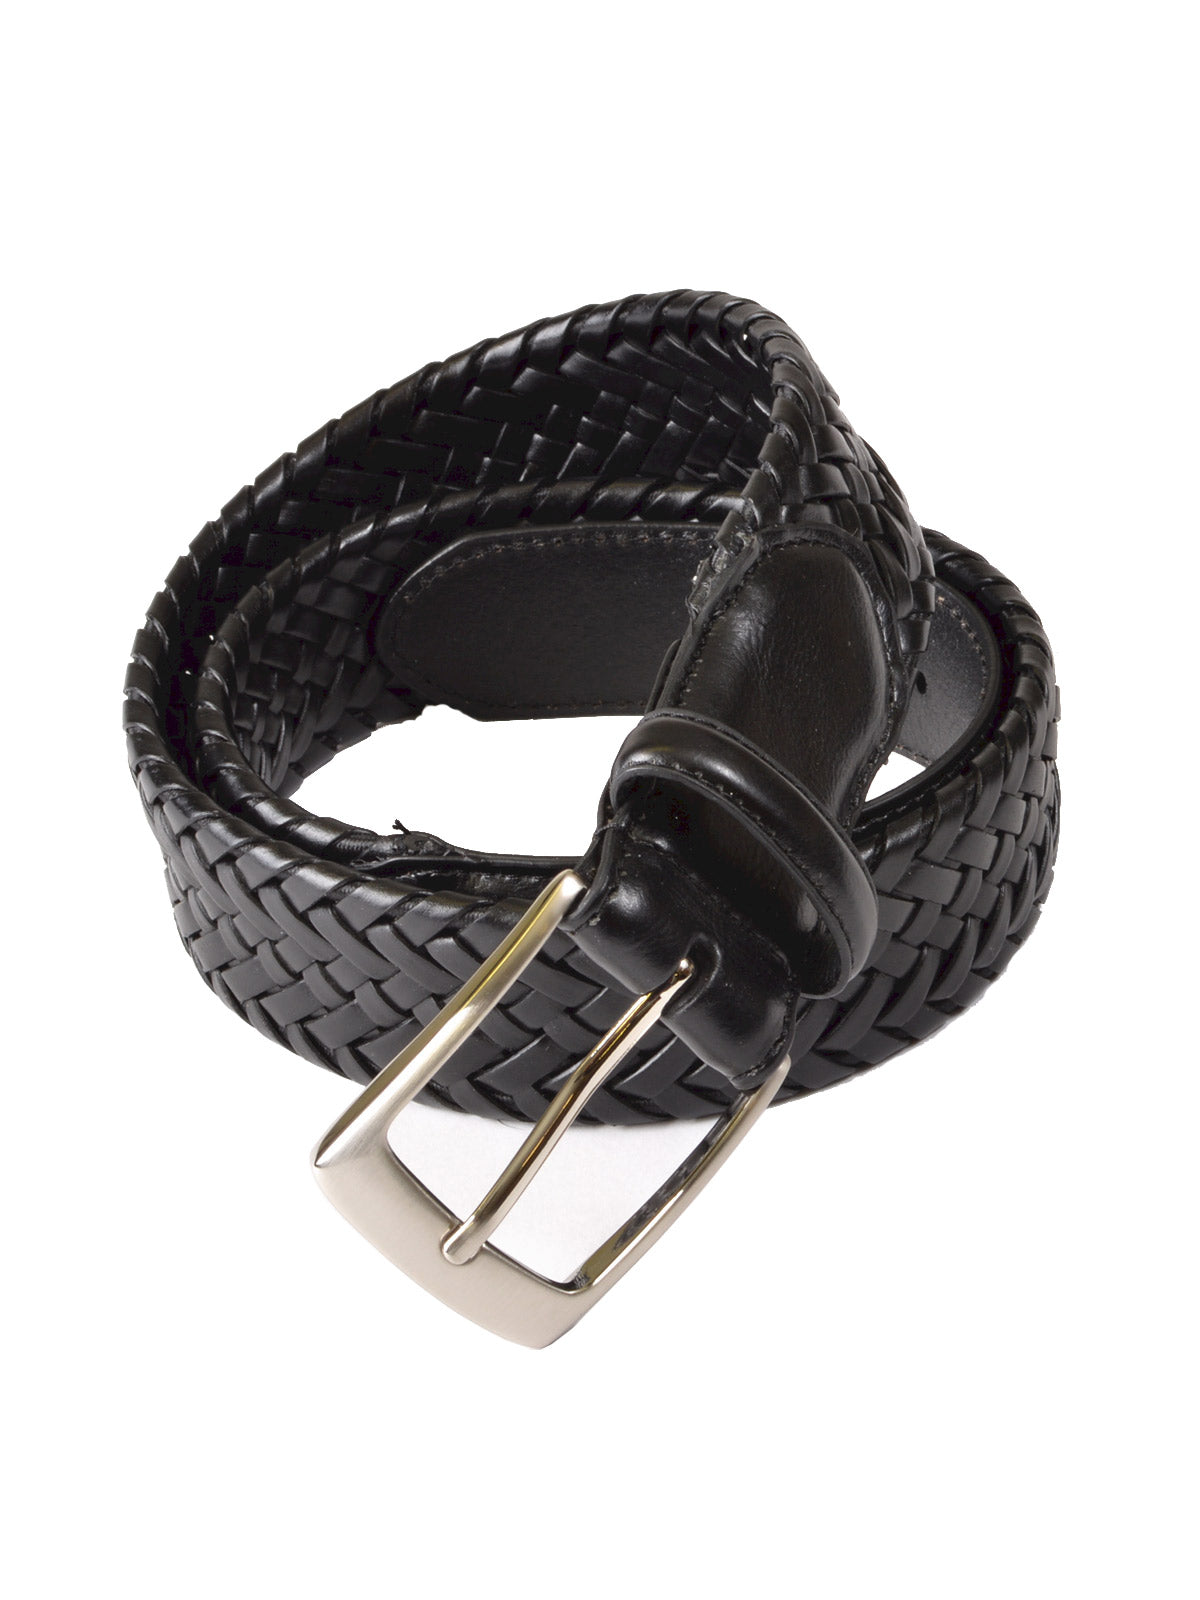 Outfitter Genuine Leather Braided Stretch Belts in Black - Big Man Sizes